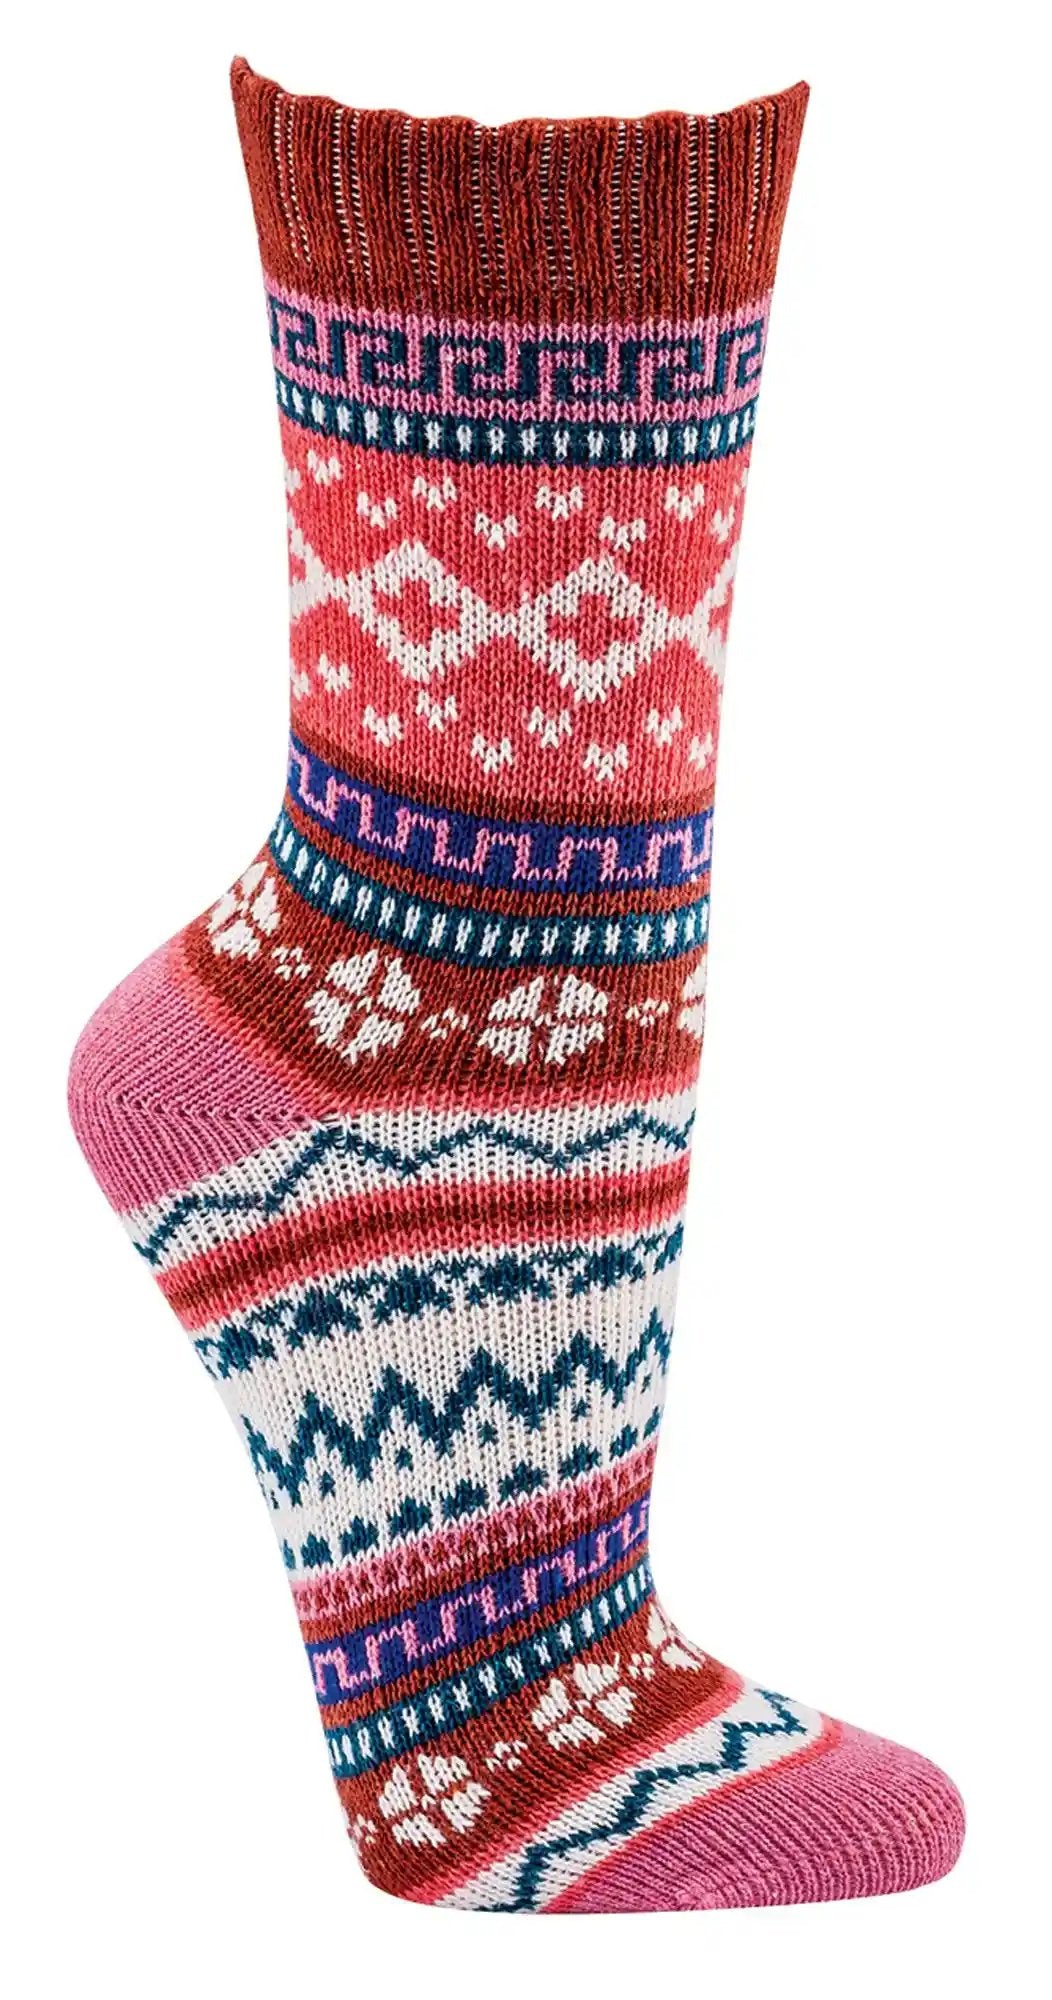 3 or 6 pairs of colorful Norwegian socks cotton with a beautiful pattern Hygge women girls